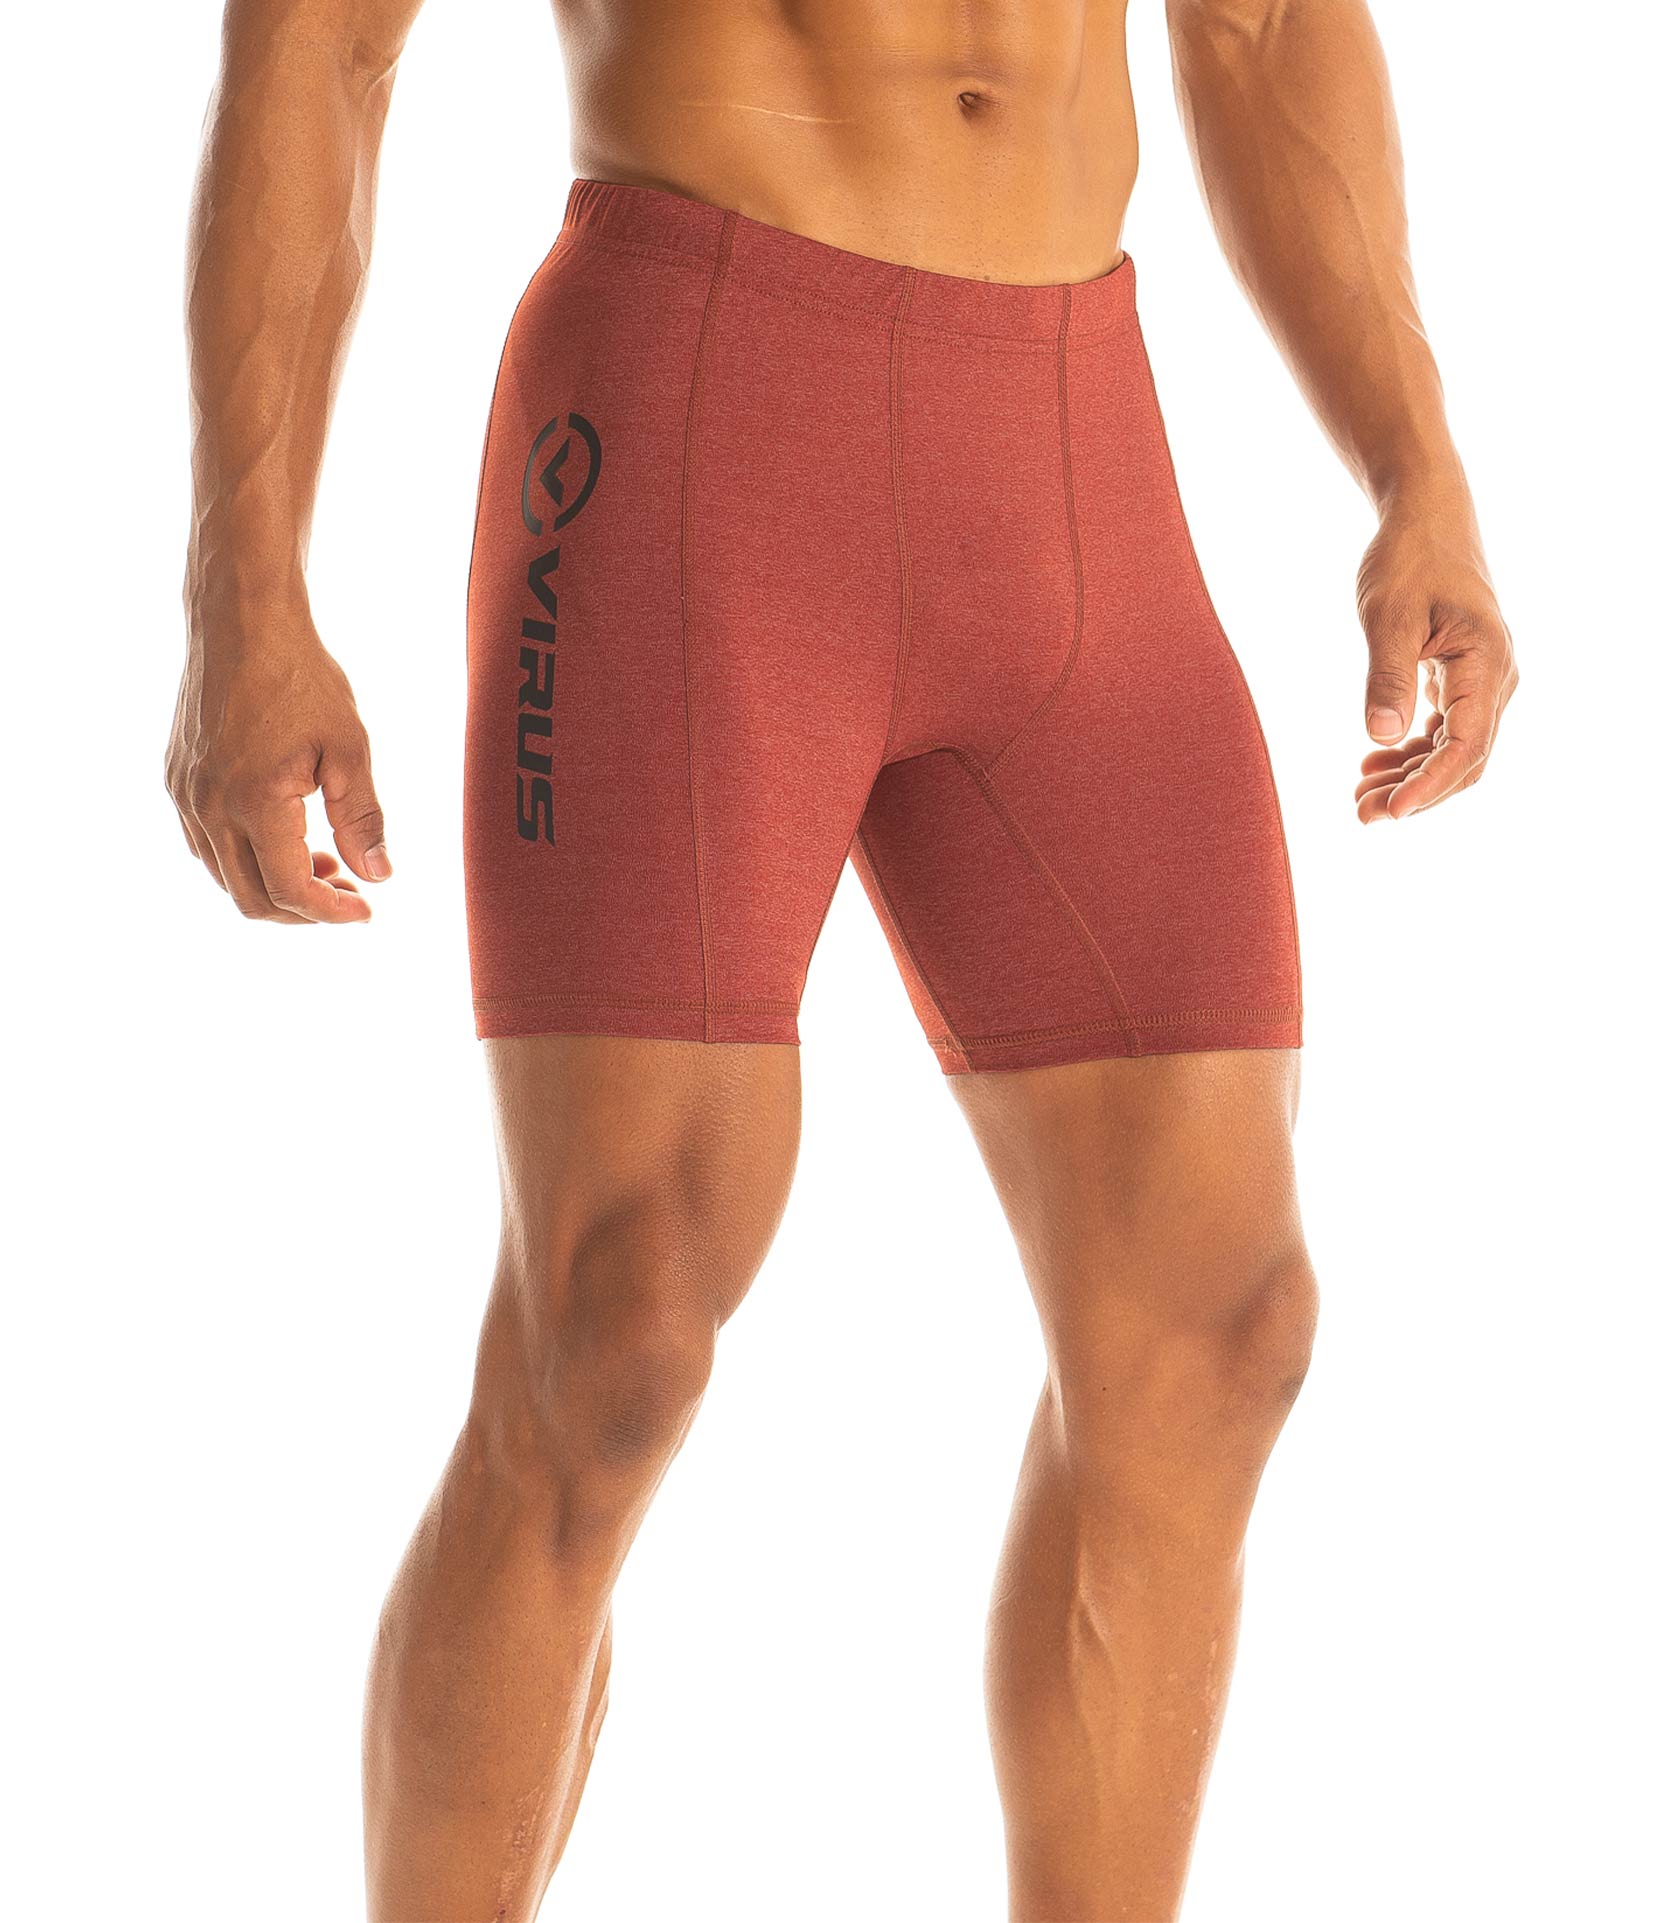 Virus Mens Stay Cool Airflow Compression Shorts - Gray - 2XL